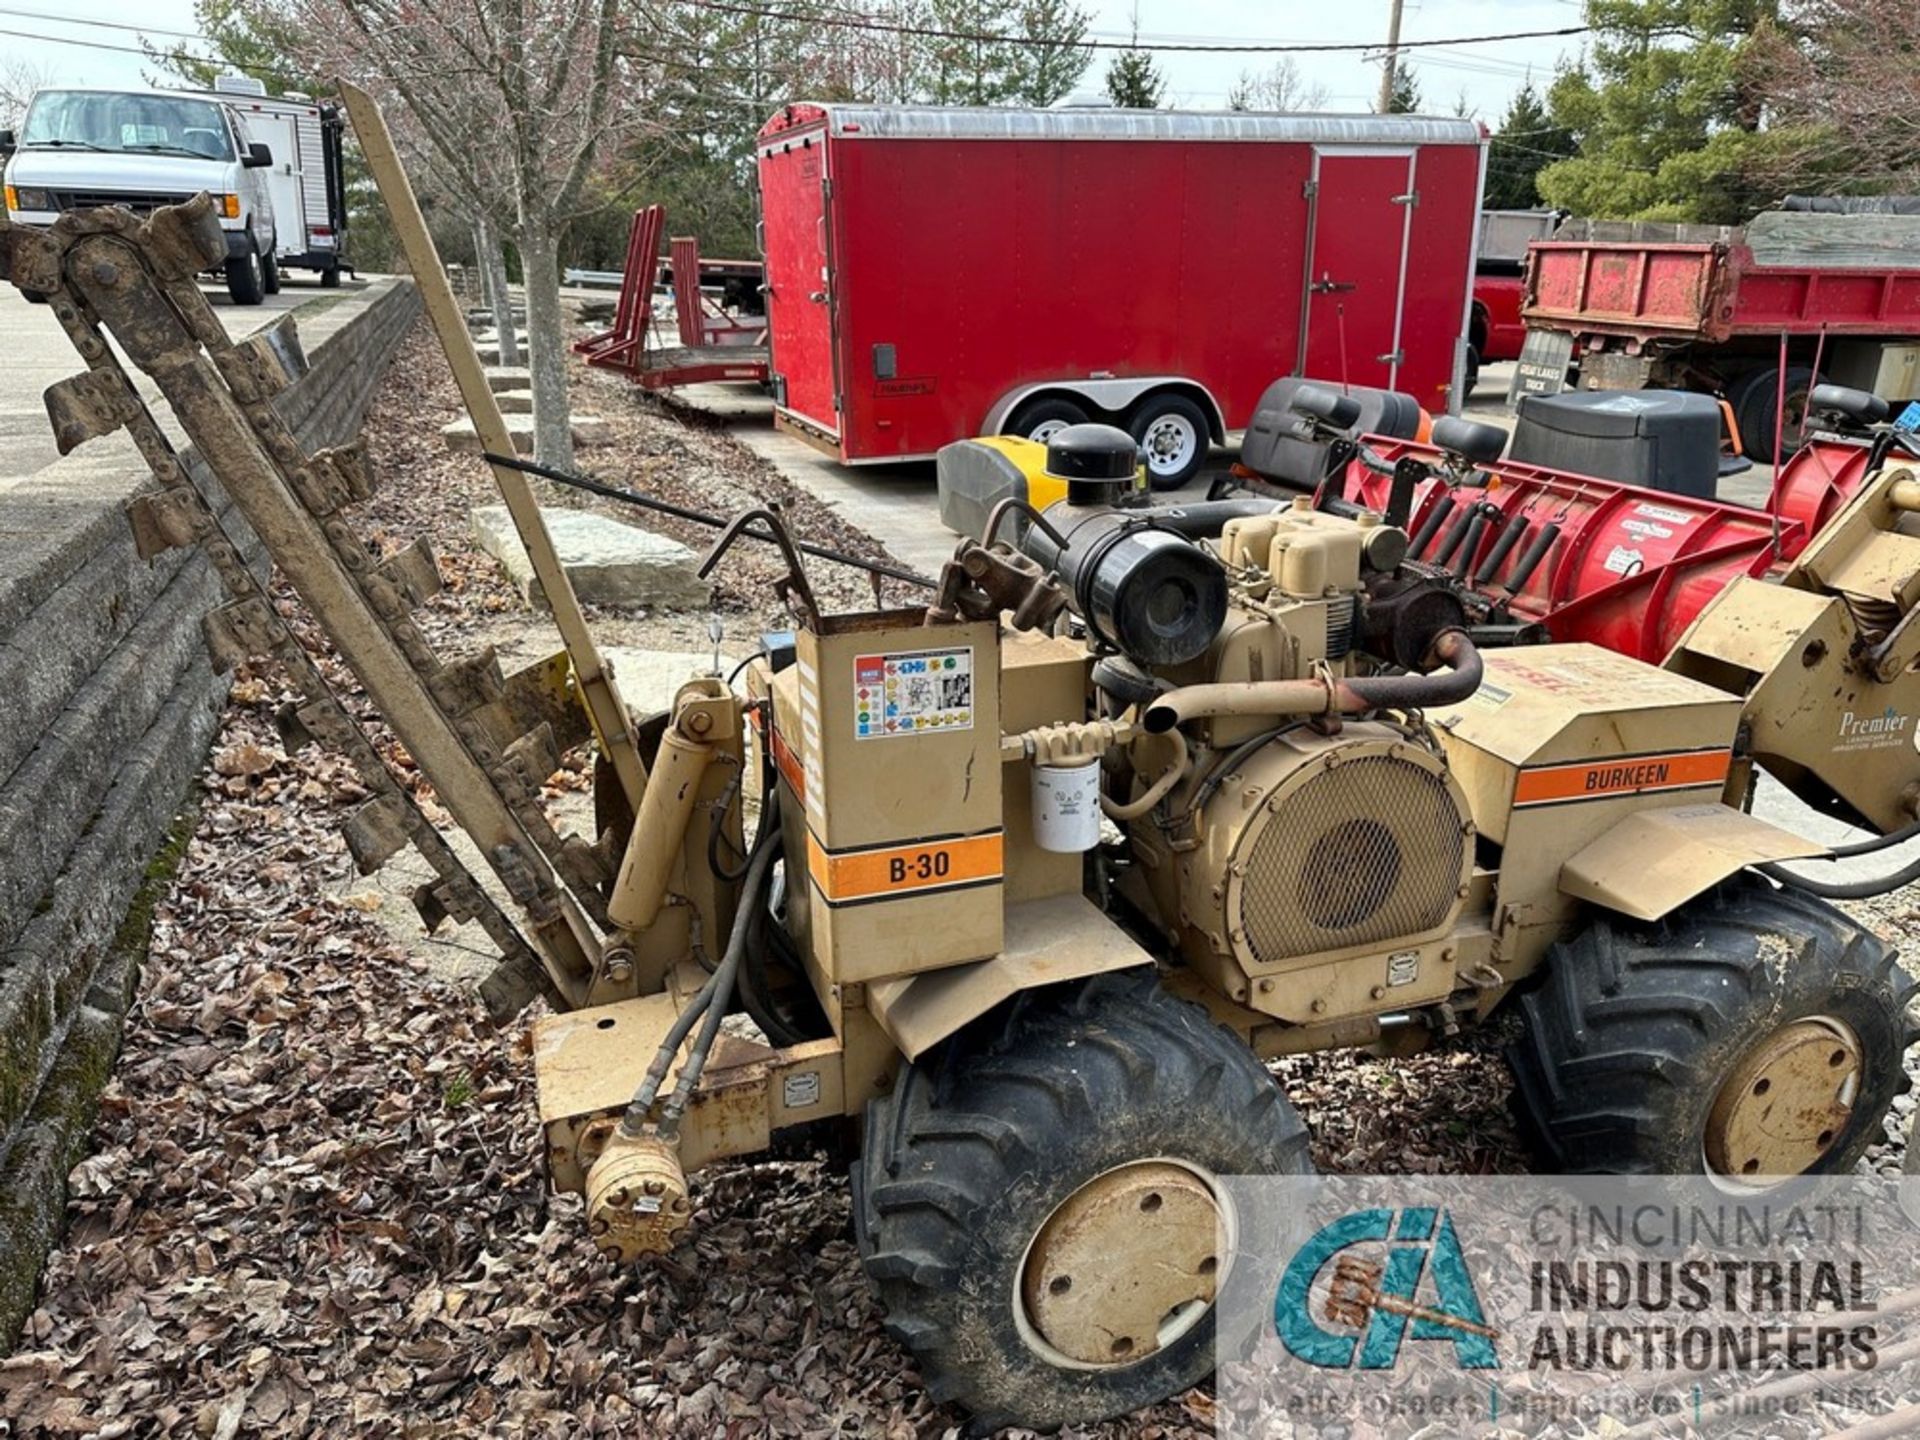 BURKEEN MODEL B-30 DIESEL POWER TRENCHER WITH CABLE PLOW S/N B30-1386, HATZ DIESEL ENGINE - Image 8 of 19